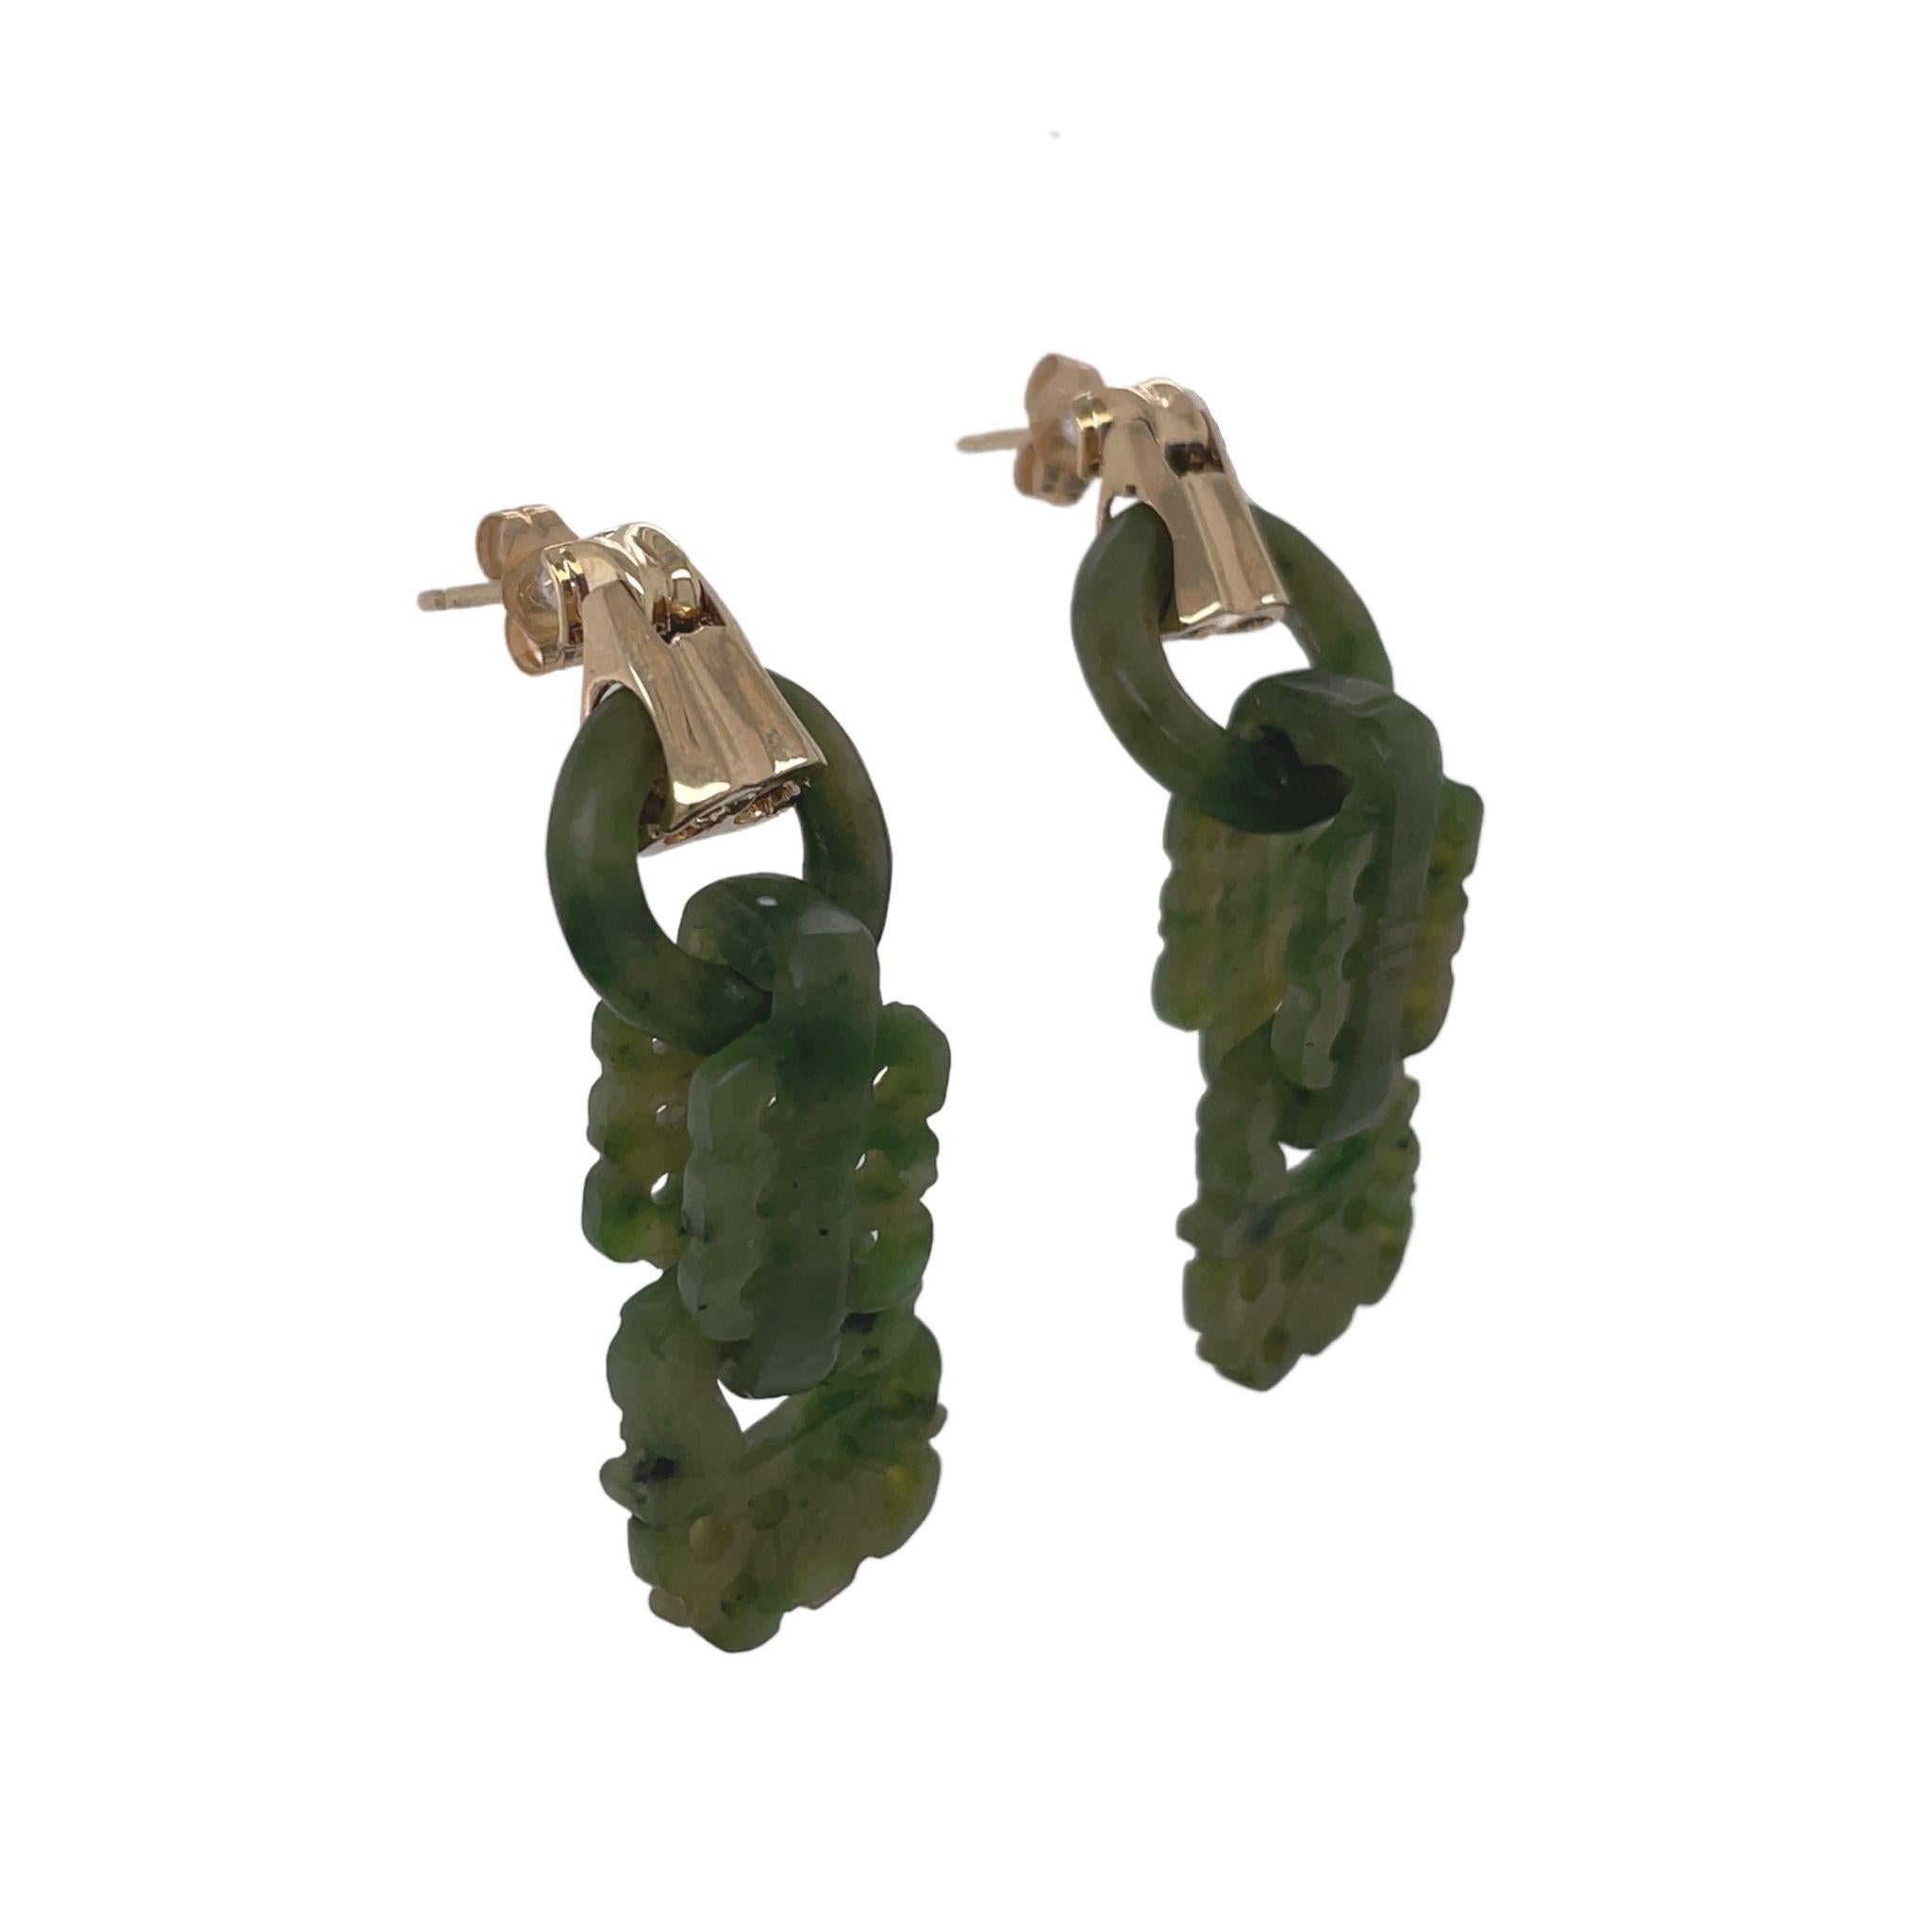 These delightful Art Deco jade earrings are sure to make you swoon! Fully articulated and in 14K yellow gold, you won’t find a pair quite like these anywhere else! The 14K gold earring posts are hinged which allows for easy storage and travel! 

The